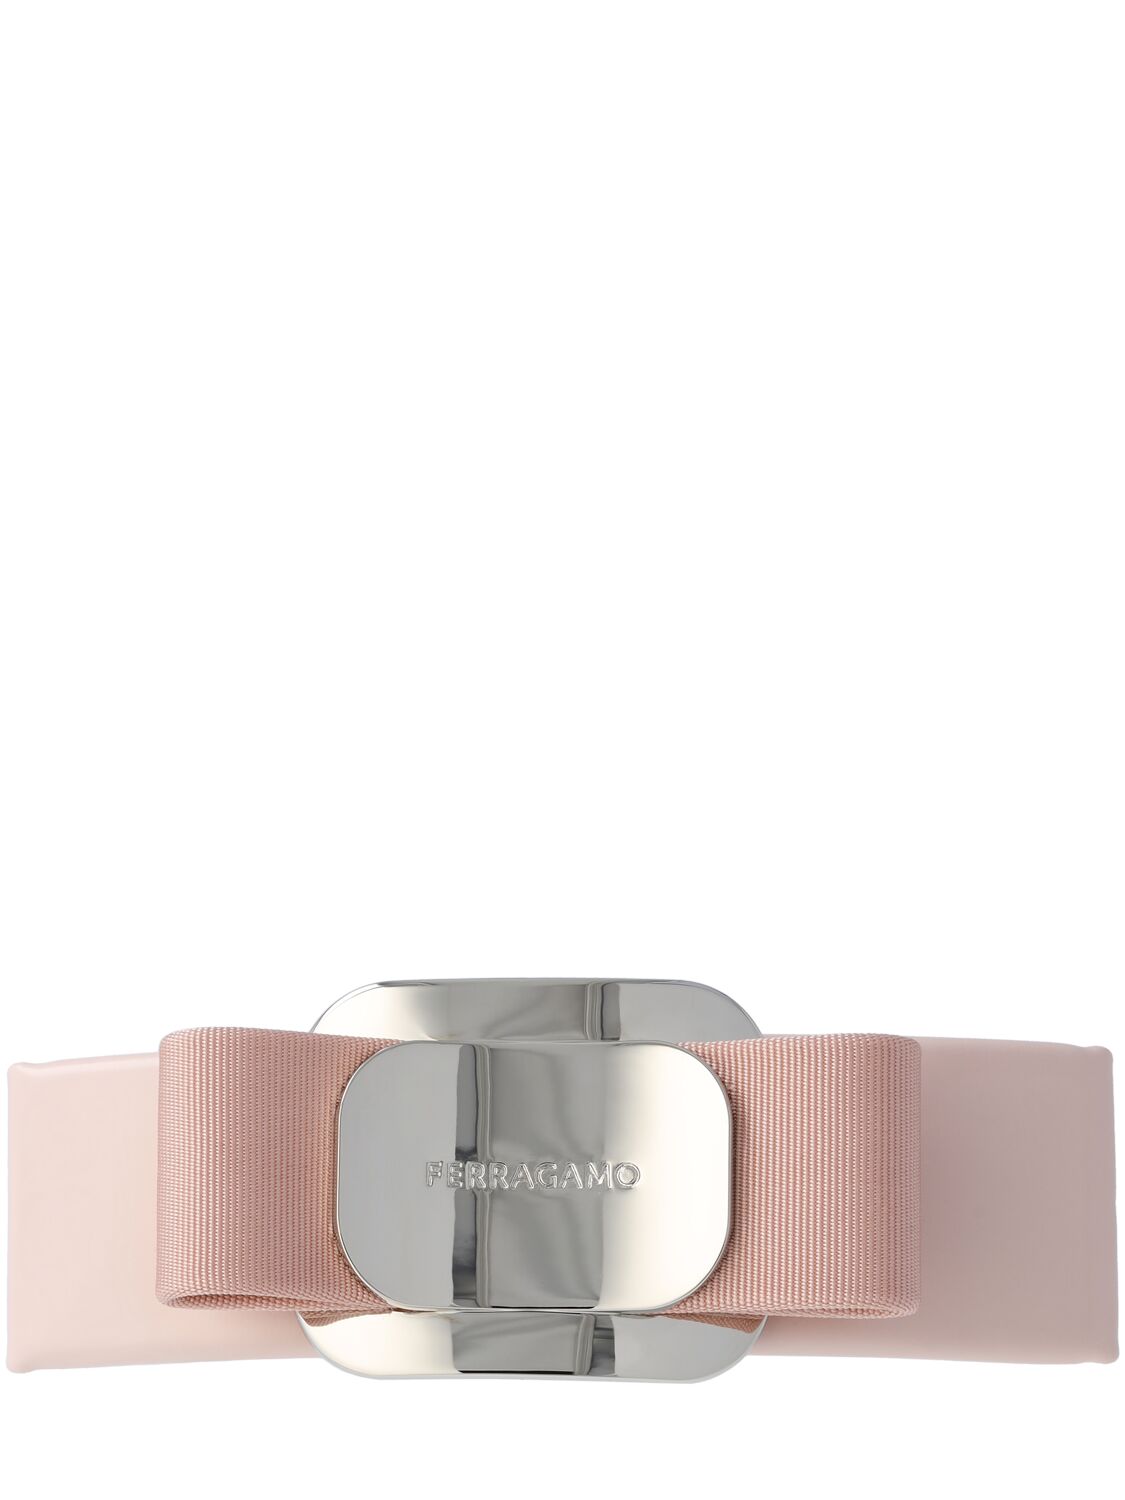 Ferragamo Vara Plate Leather Hair Clip In Pink,silver